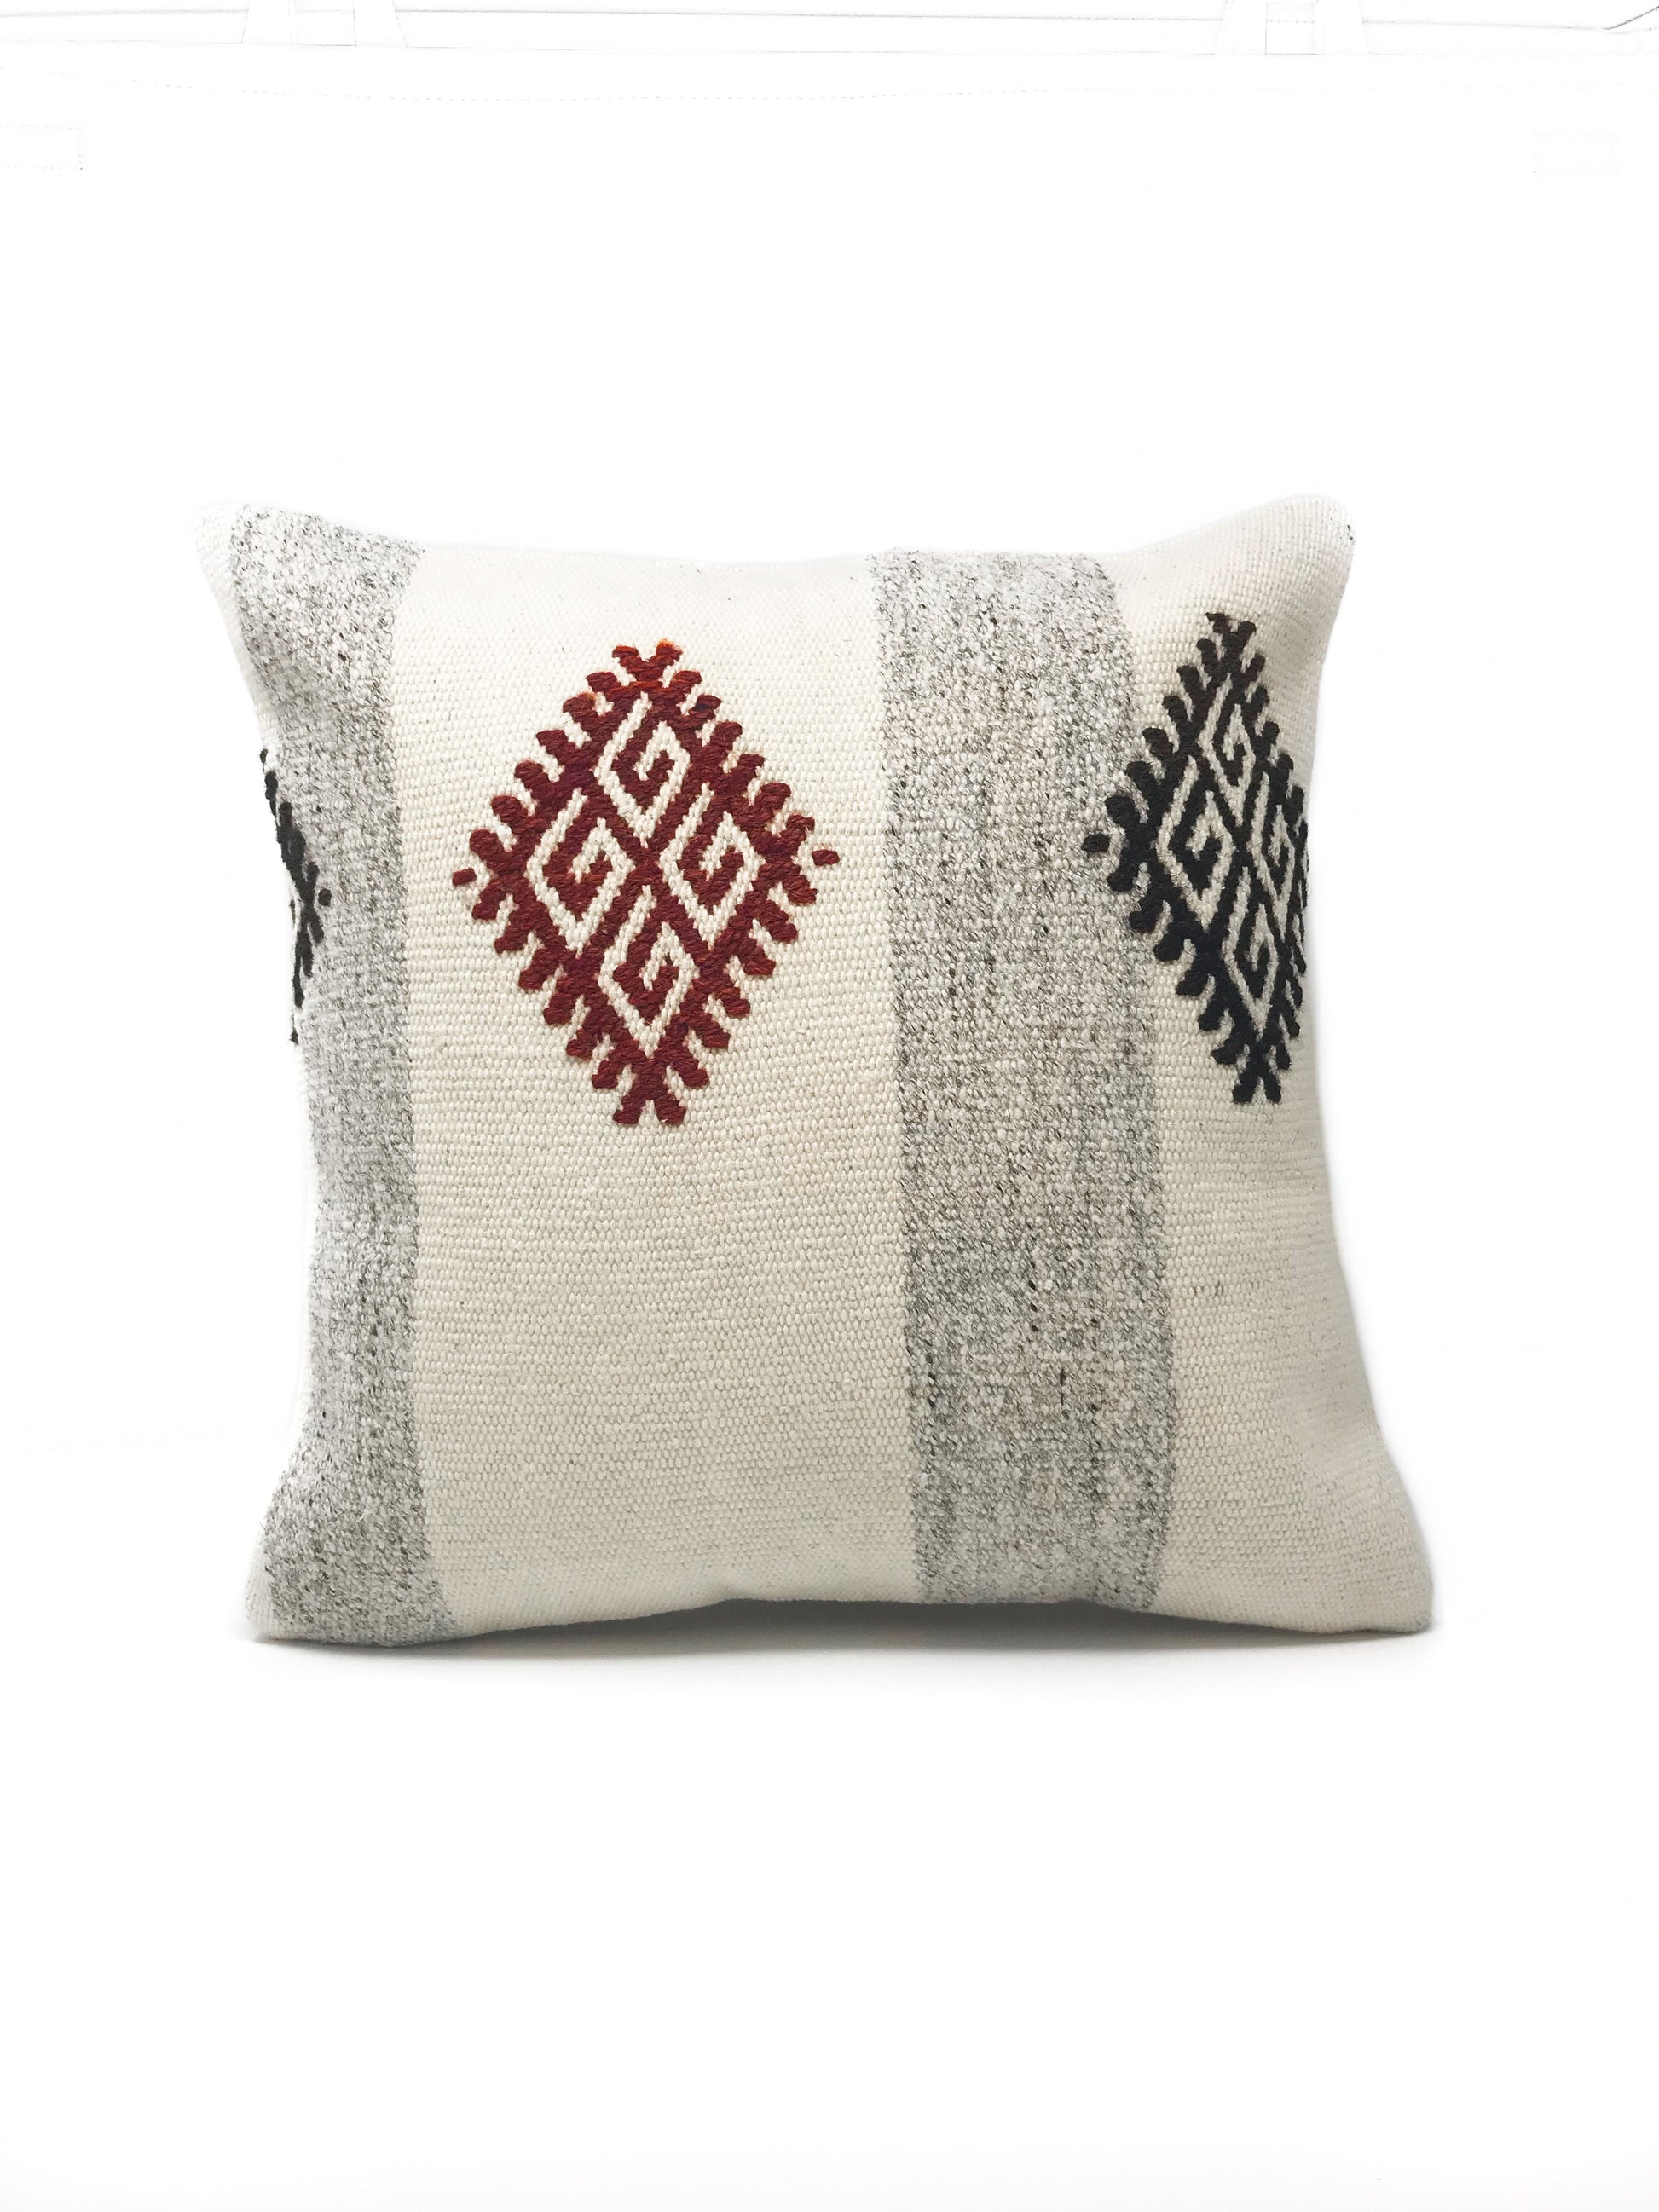 Cuckoo B Bruna pillow cover. Handmae out of vintage Kilim rugs, unique. Product made in Istambul, Turkey